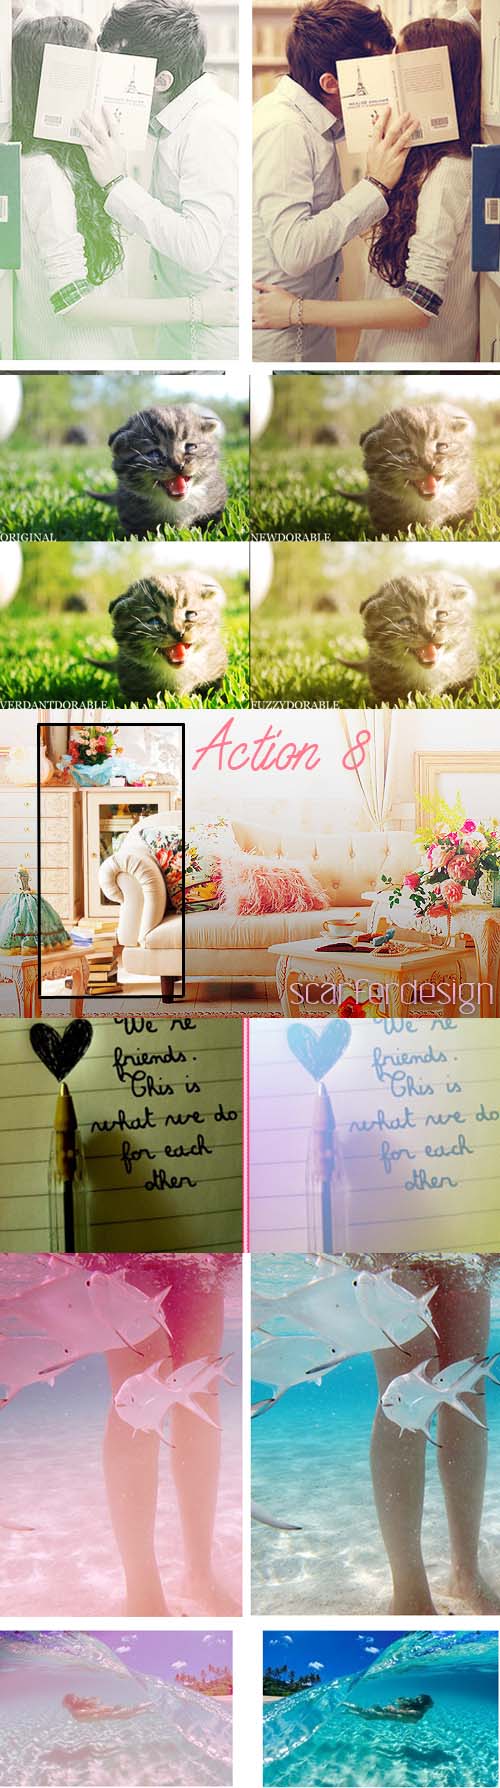 Photoshop Action 2012 pack 501